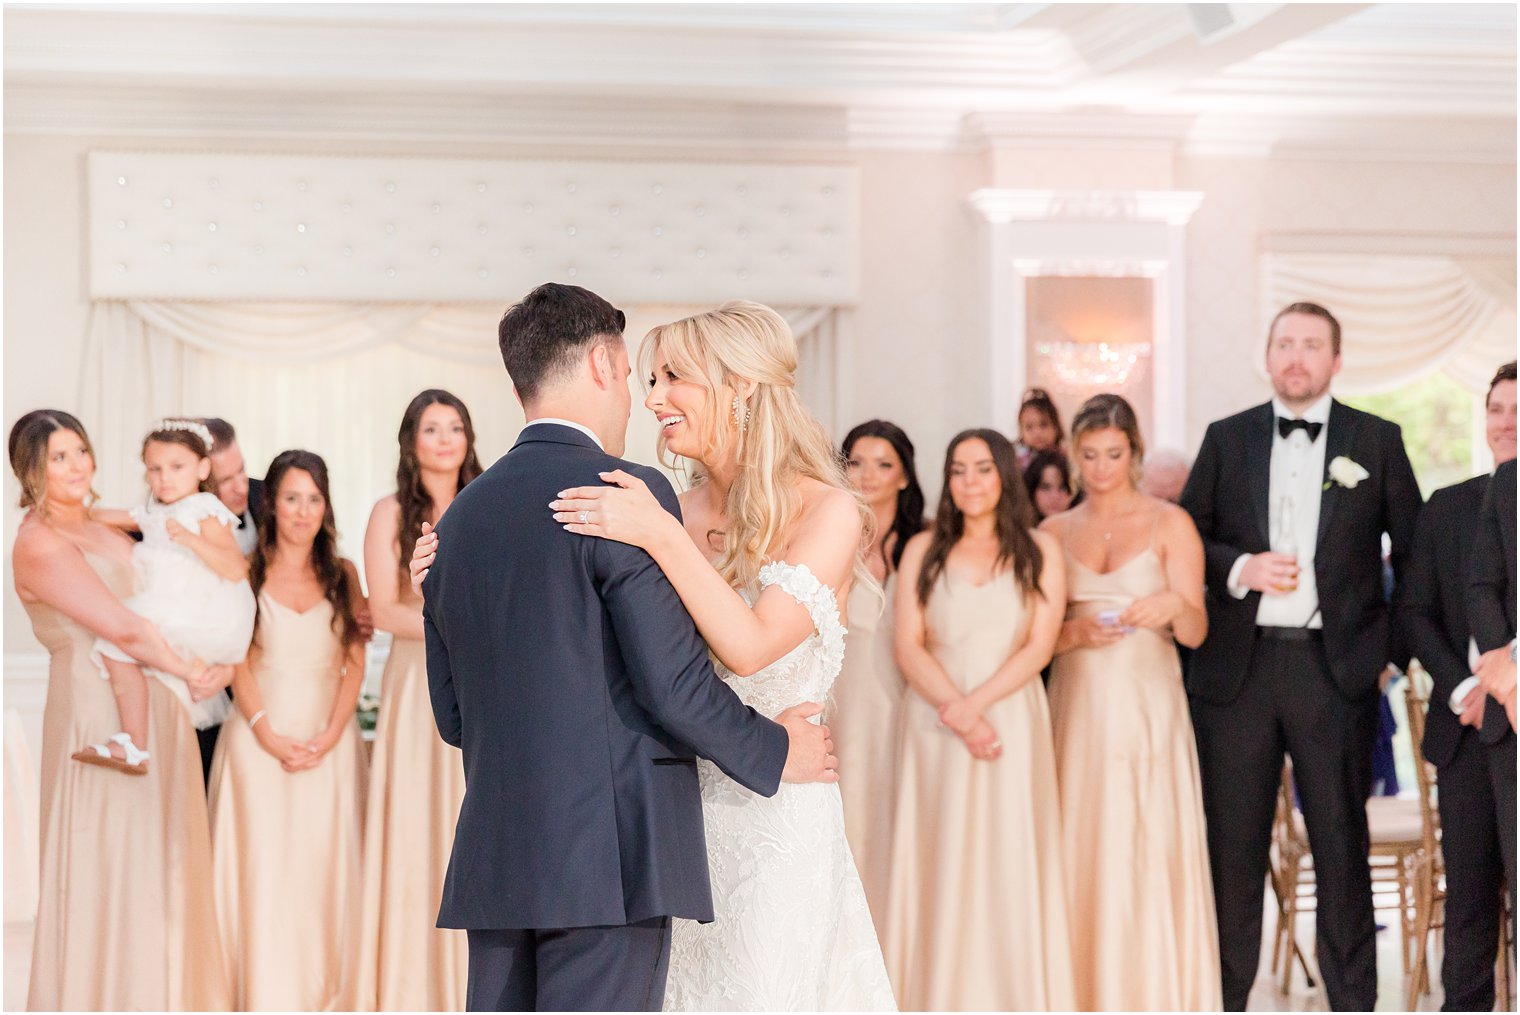 bride and groom have first dance in ballroom surrounded by wedding party